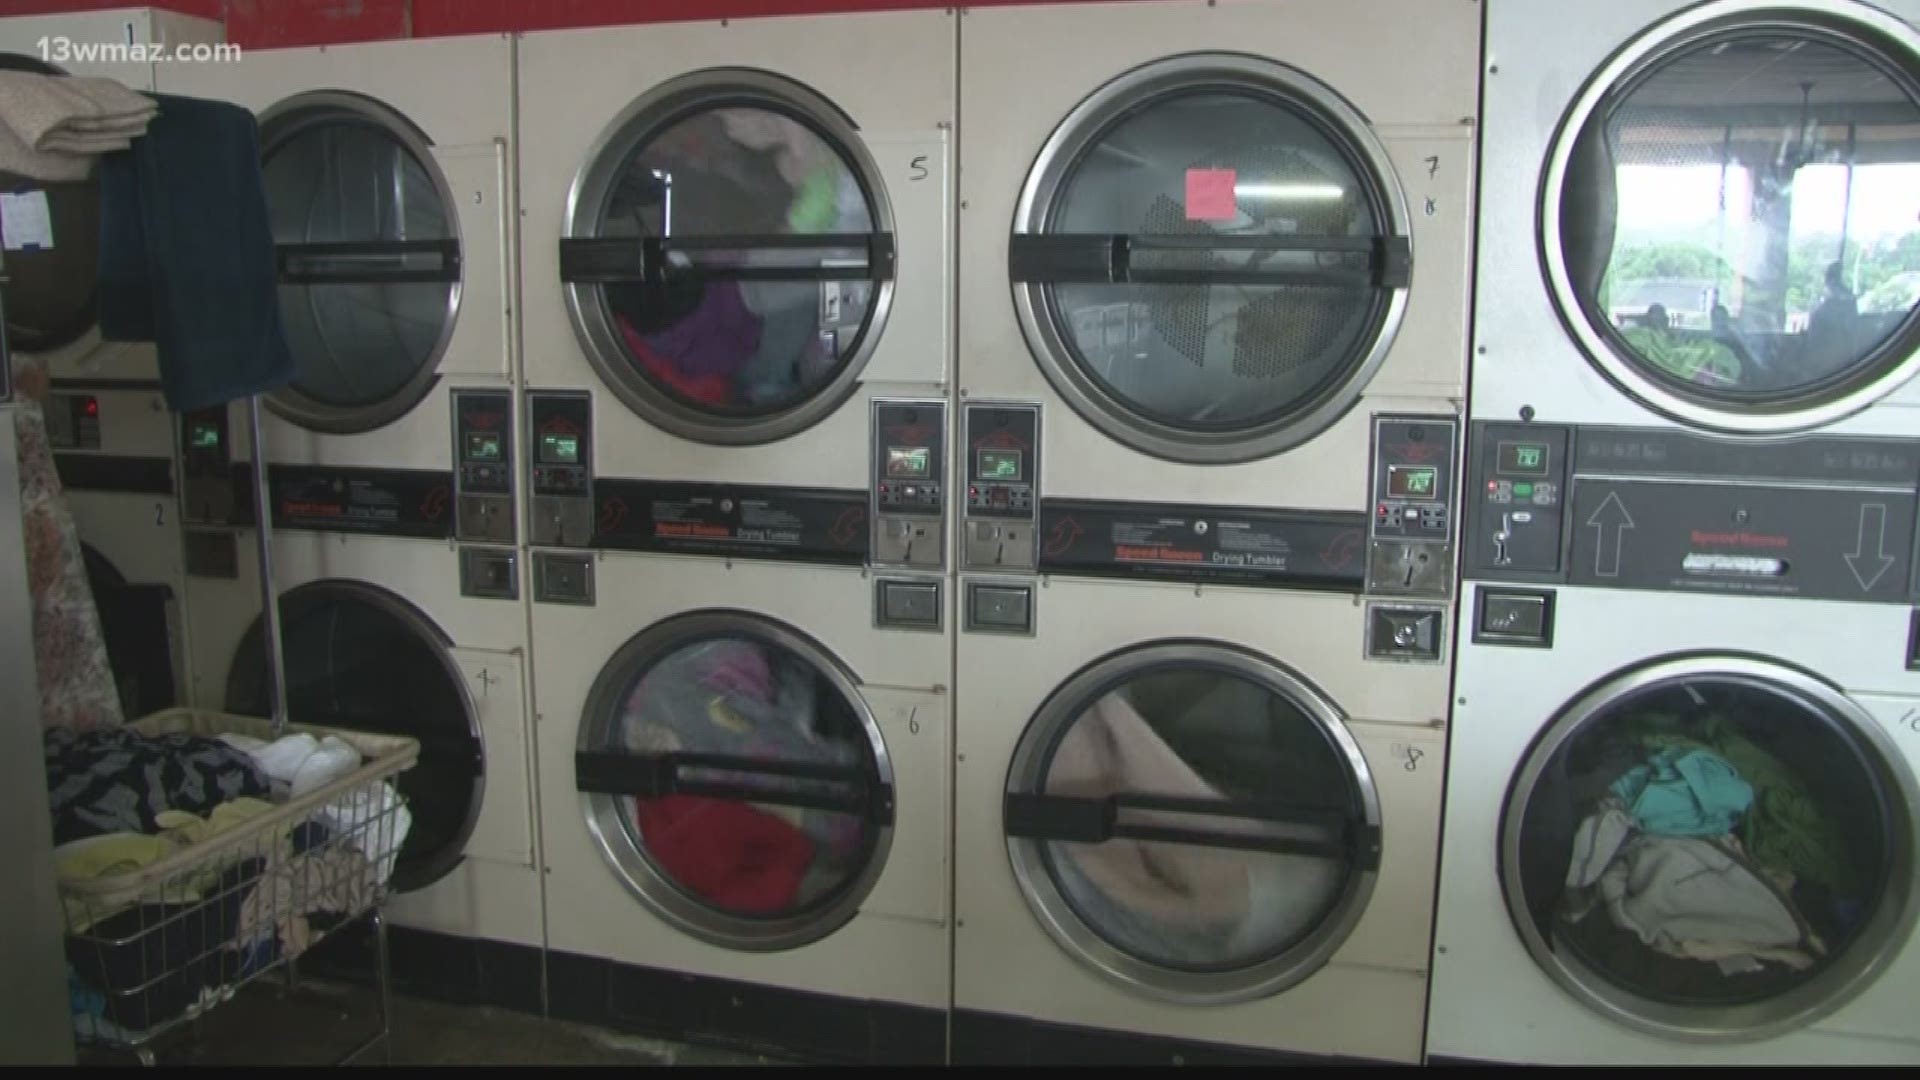 The program aims to cut down on referrals to the Division of Family and Children's Services based on children's physical appearances because of dirty clothes.